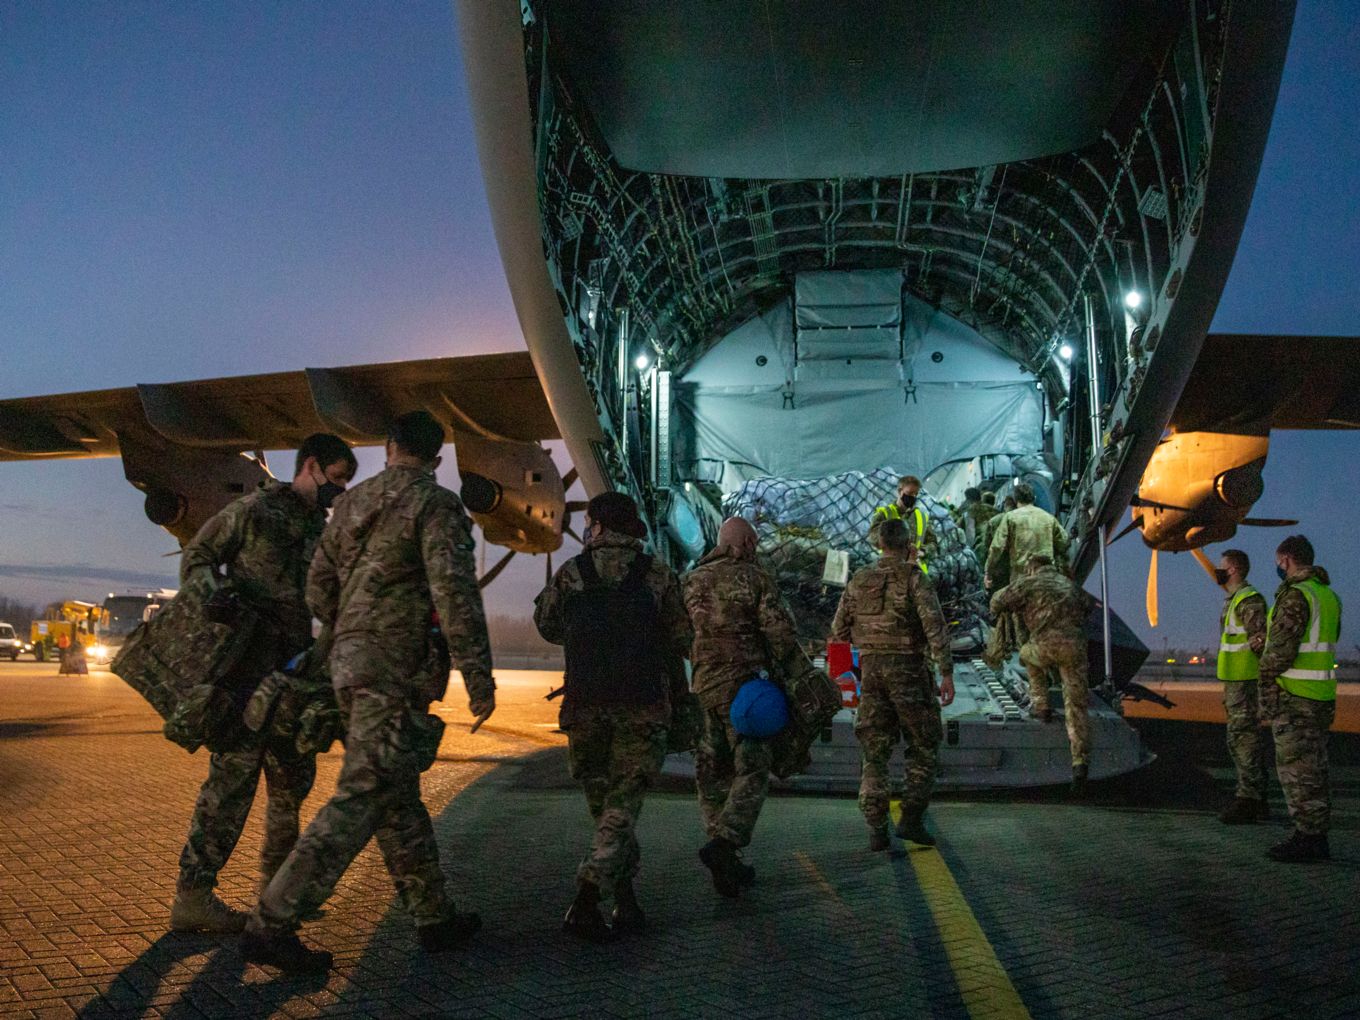 Image shows military personnel boarding an RAF A400M aircraft from the rear.